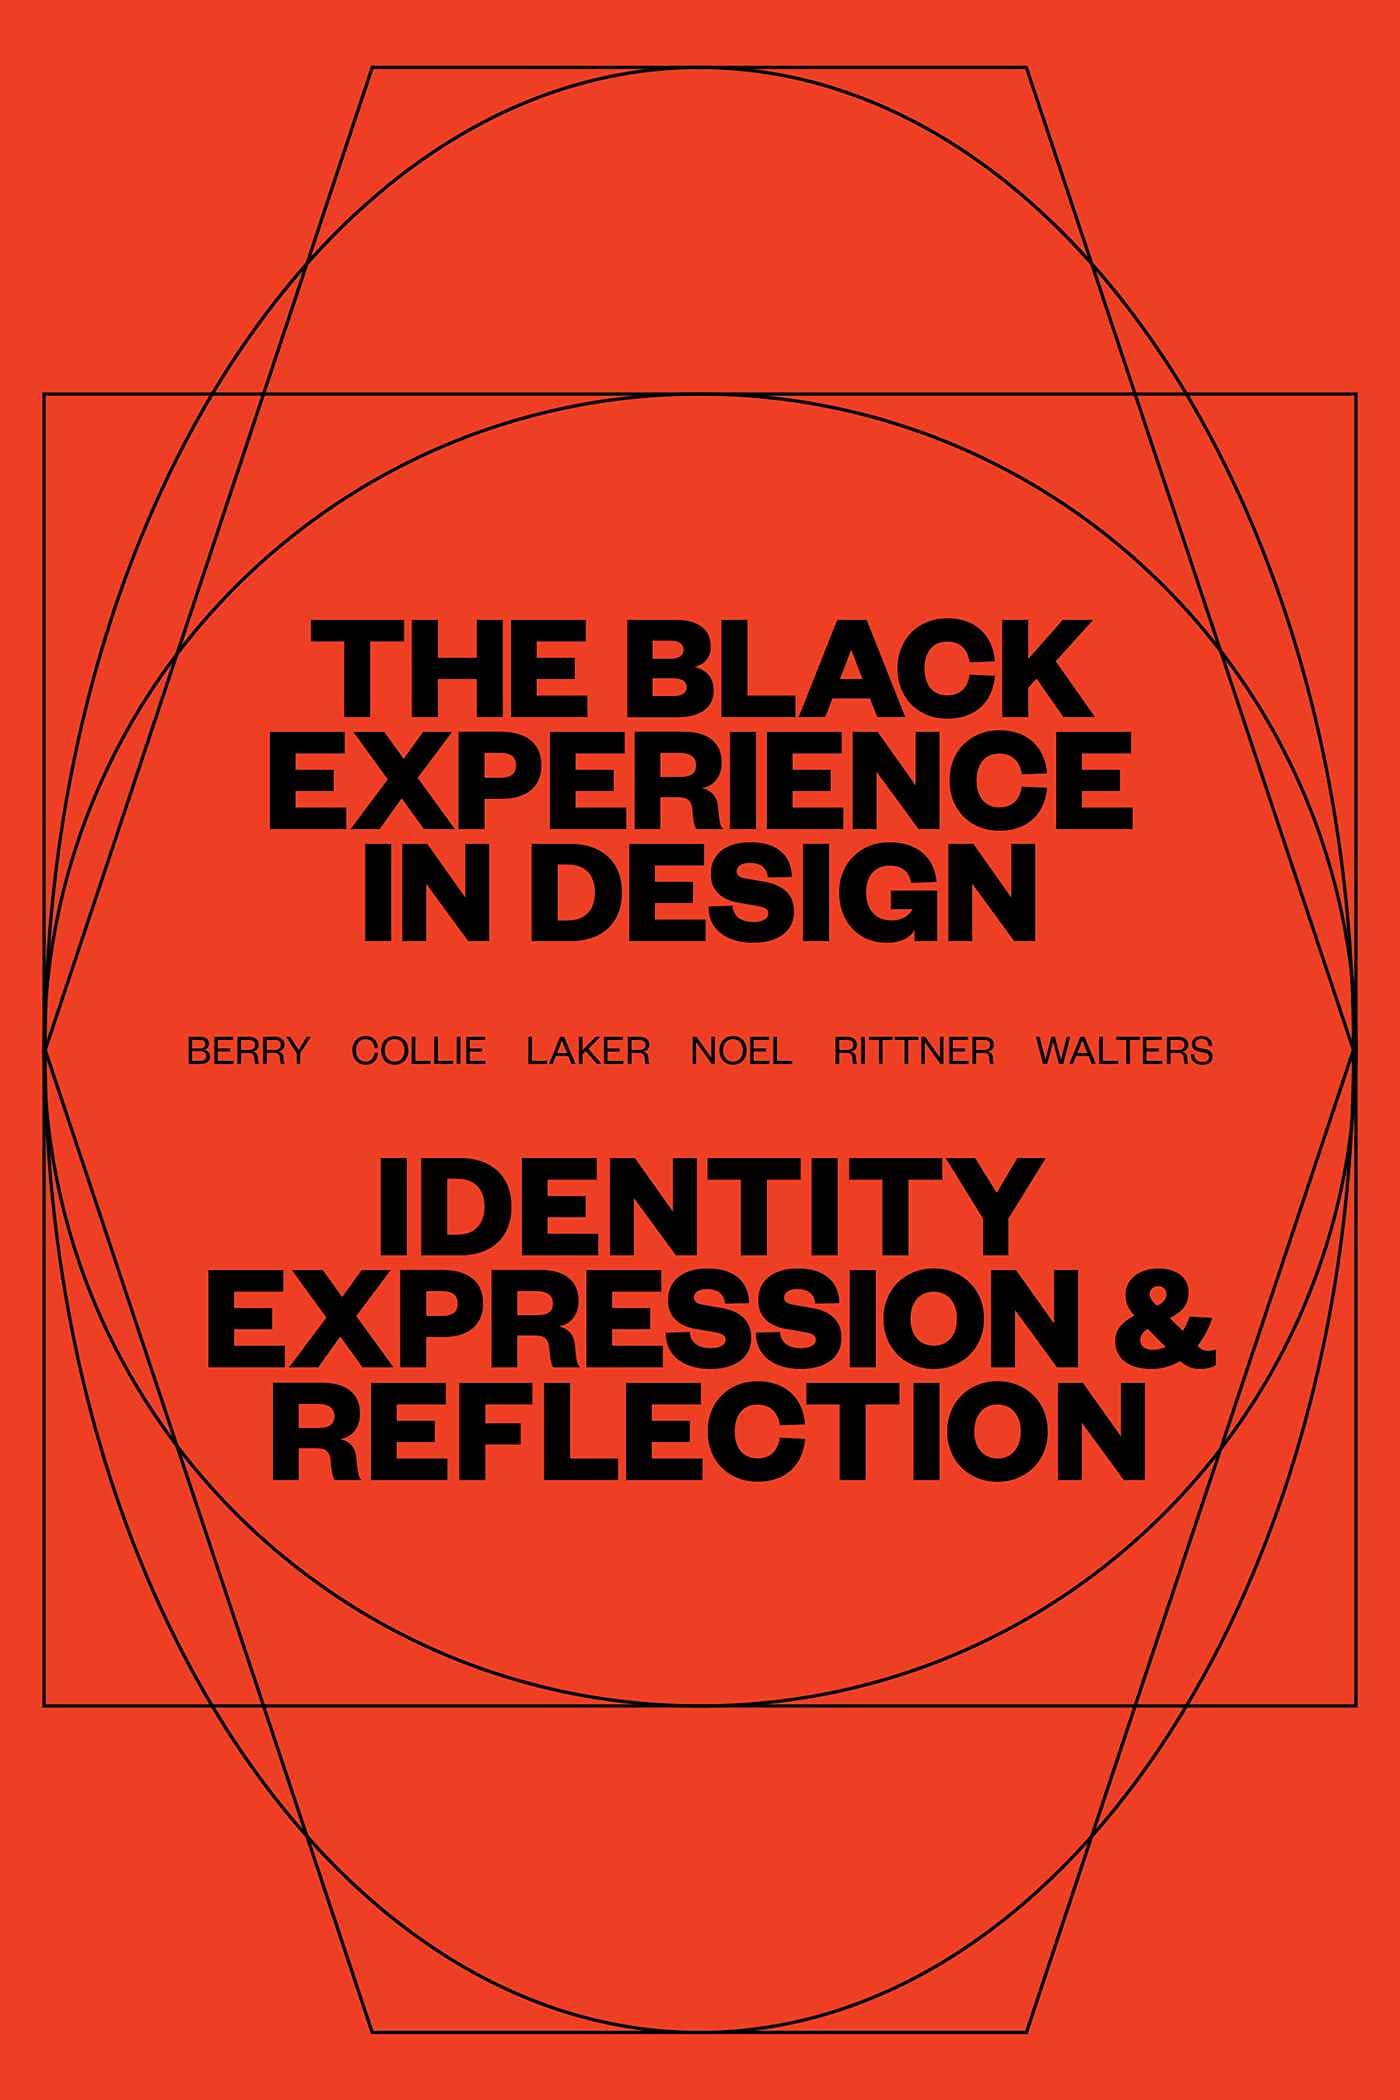 The Black Experience in Design // Identity, Expression & Reflection